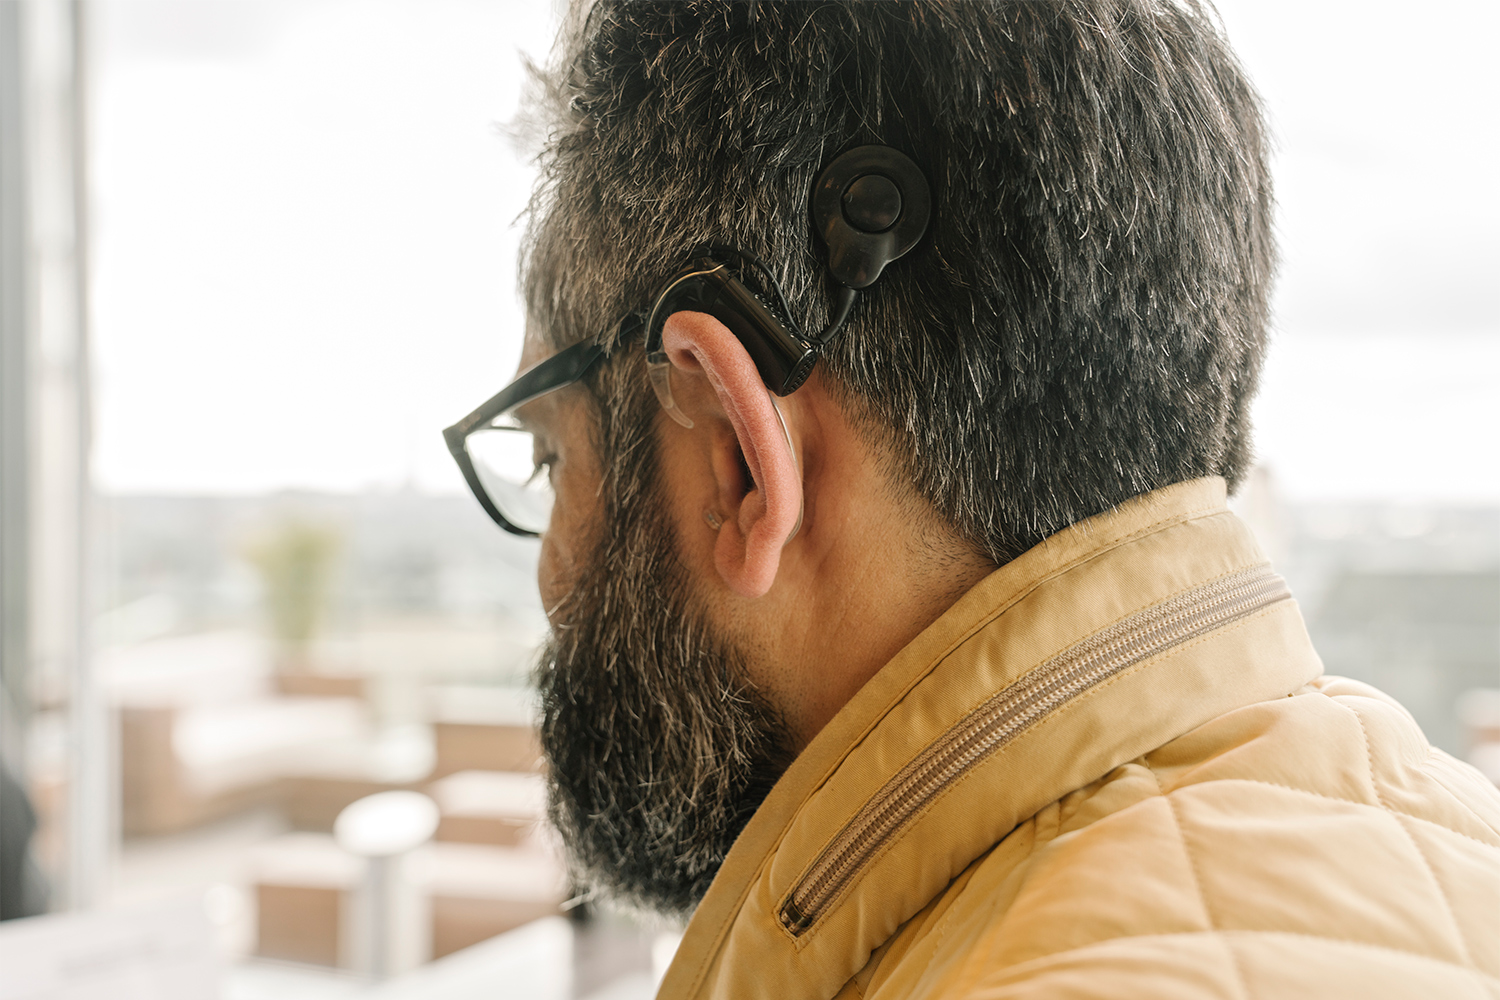 American Cochlear Implant Alliance: Man Gets Cochlear Implant After Sudden  Single-Sided Deafness from COVID-19 | NYU Langone News